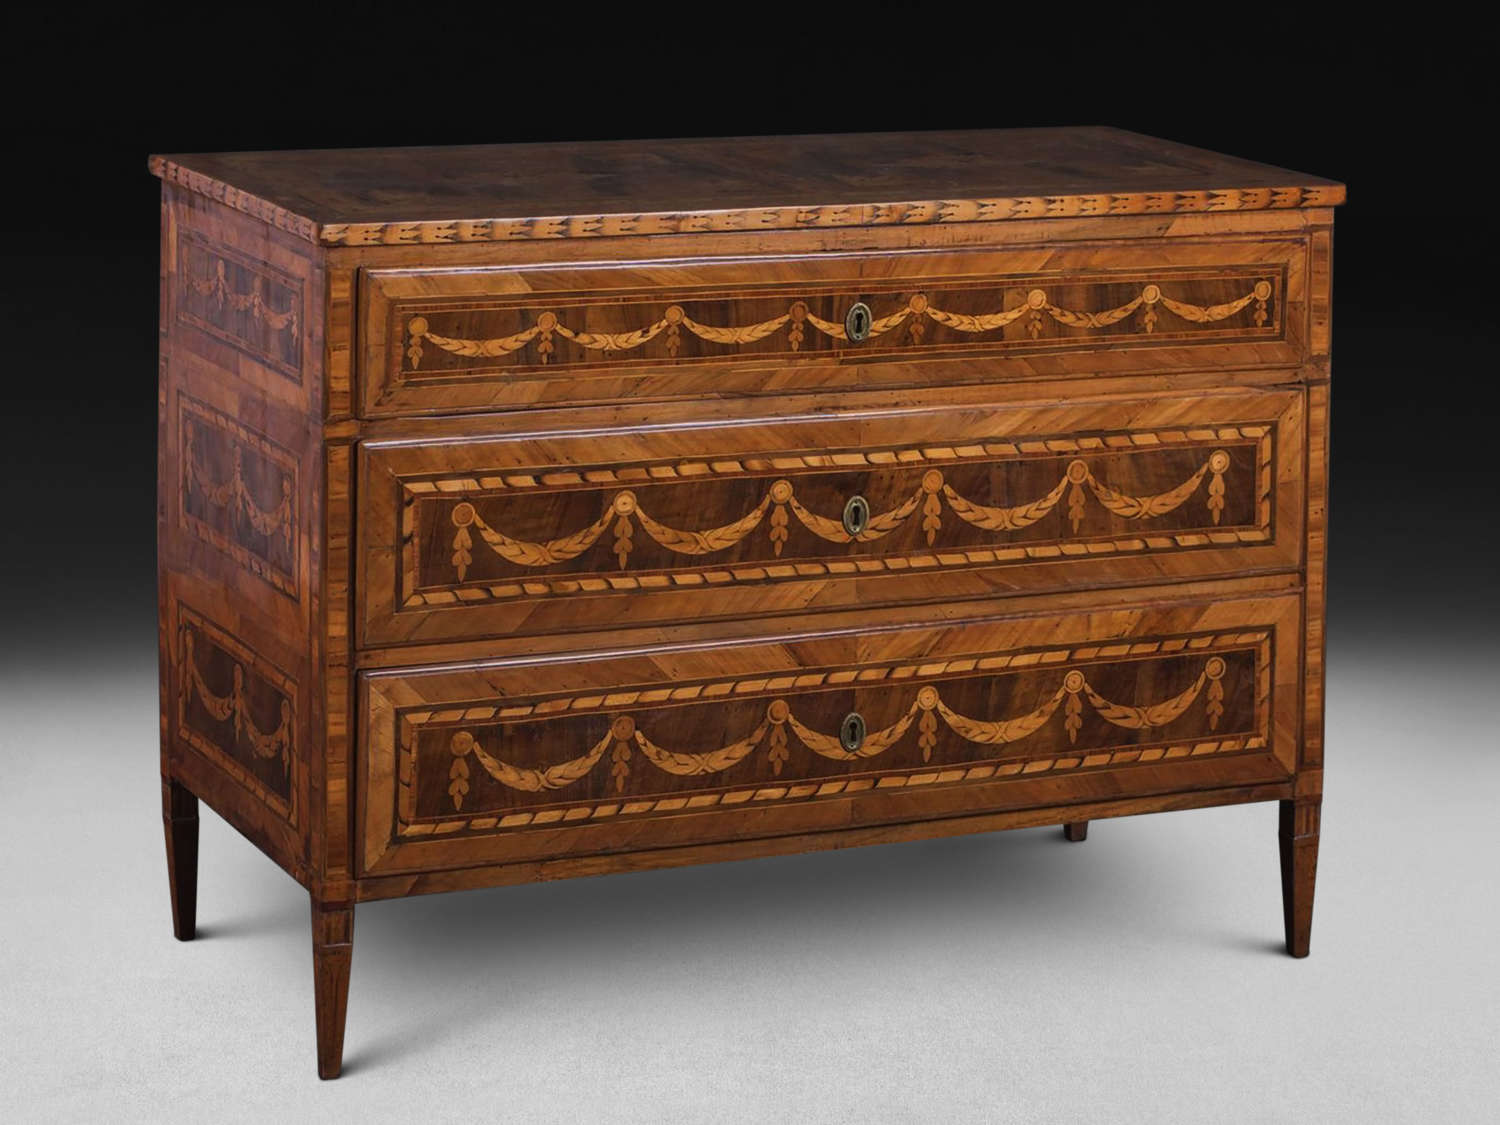 A RARE MARQUETRY COMMODE ITALY C 1790